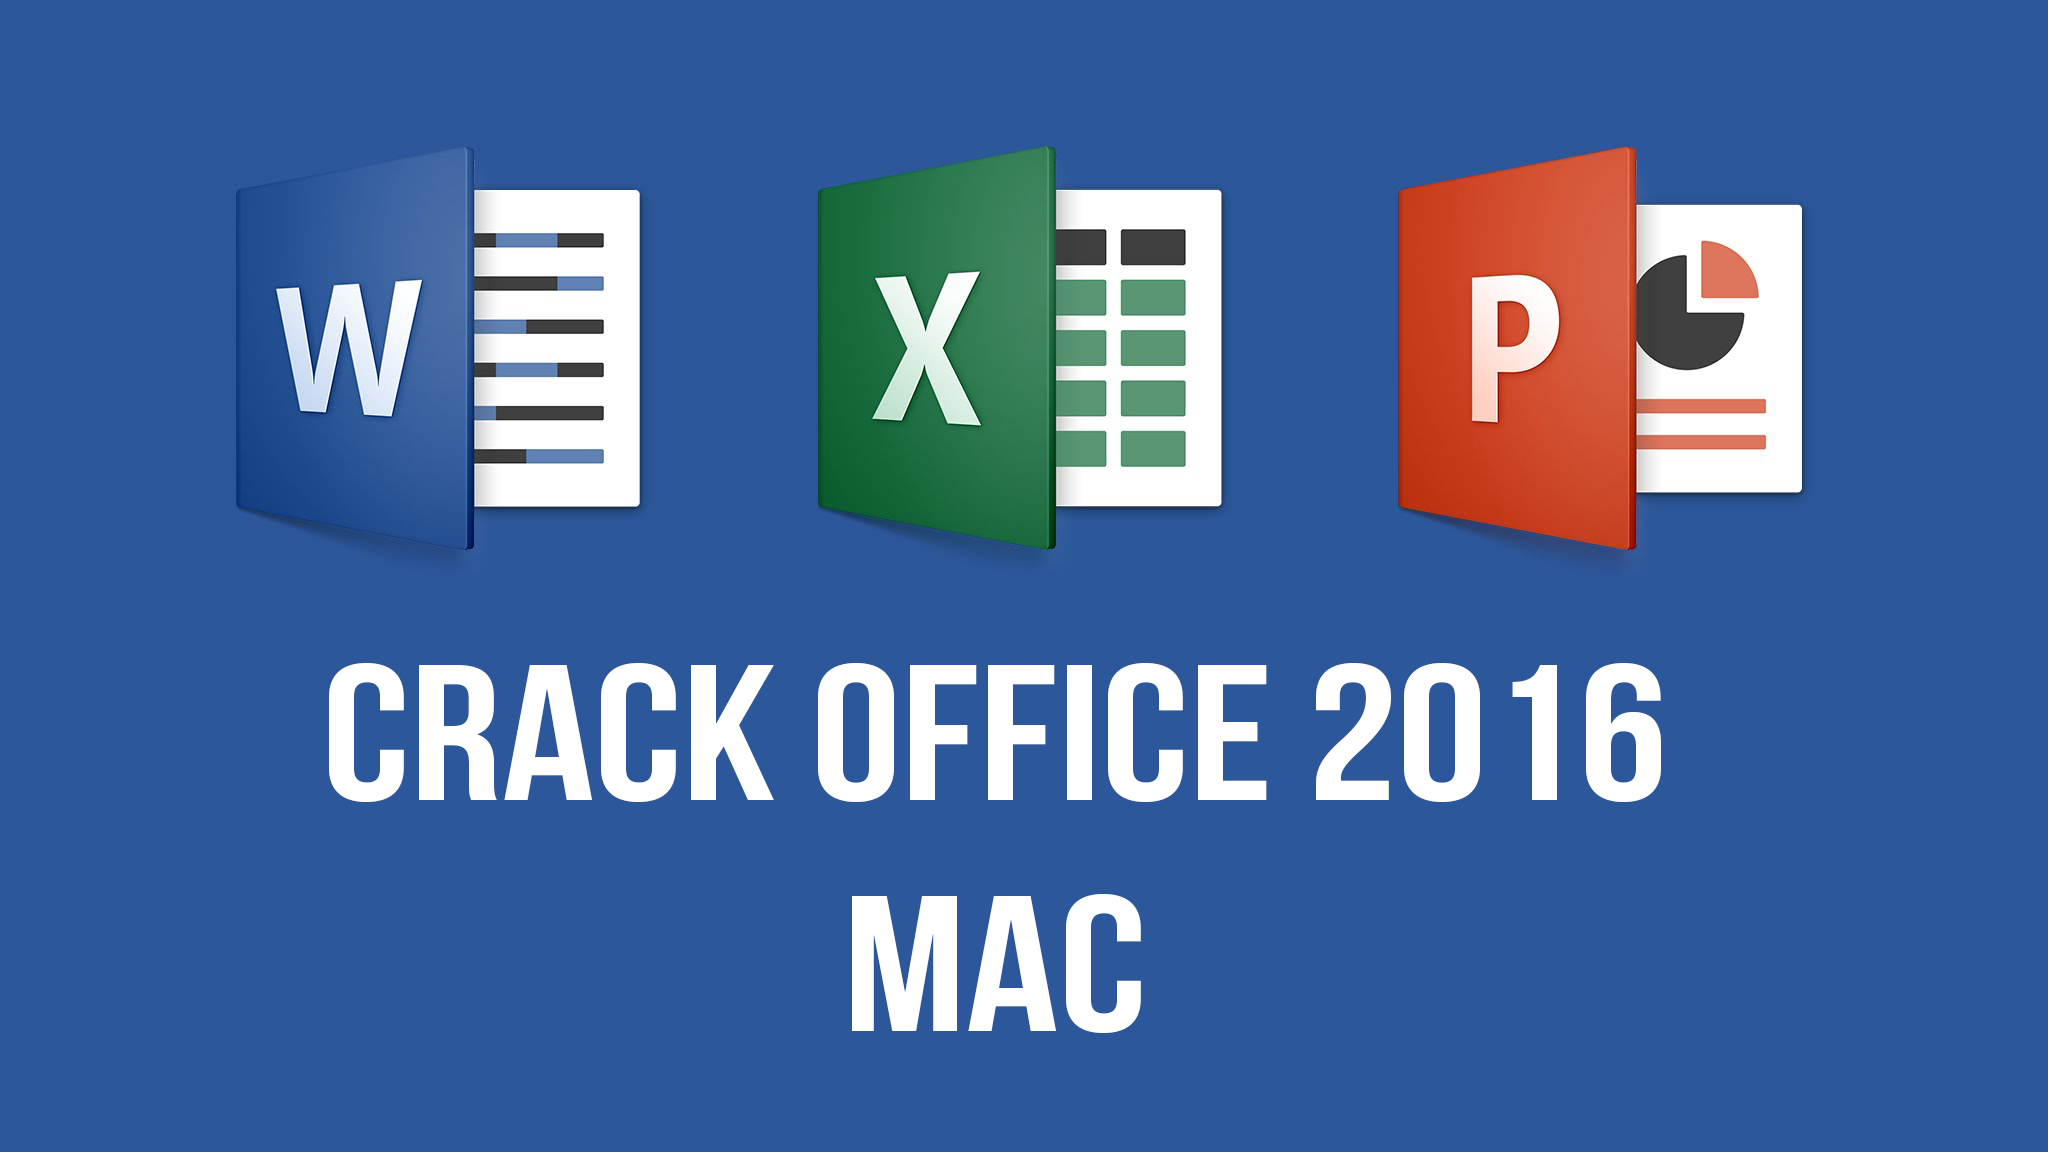 install office 2016 for mac on macbook air